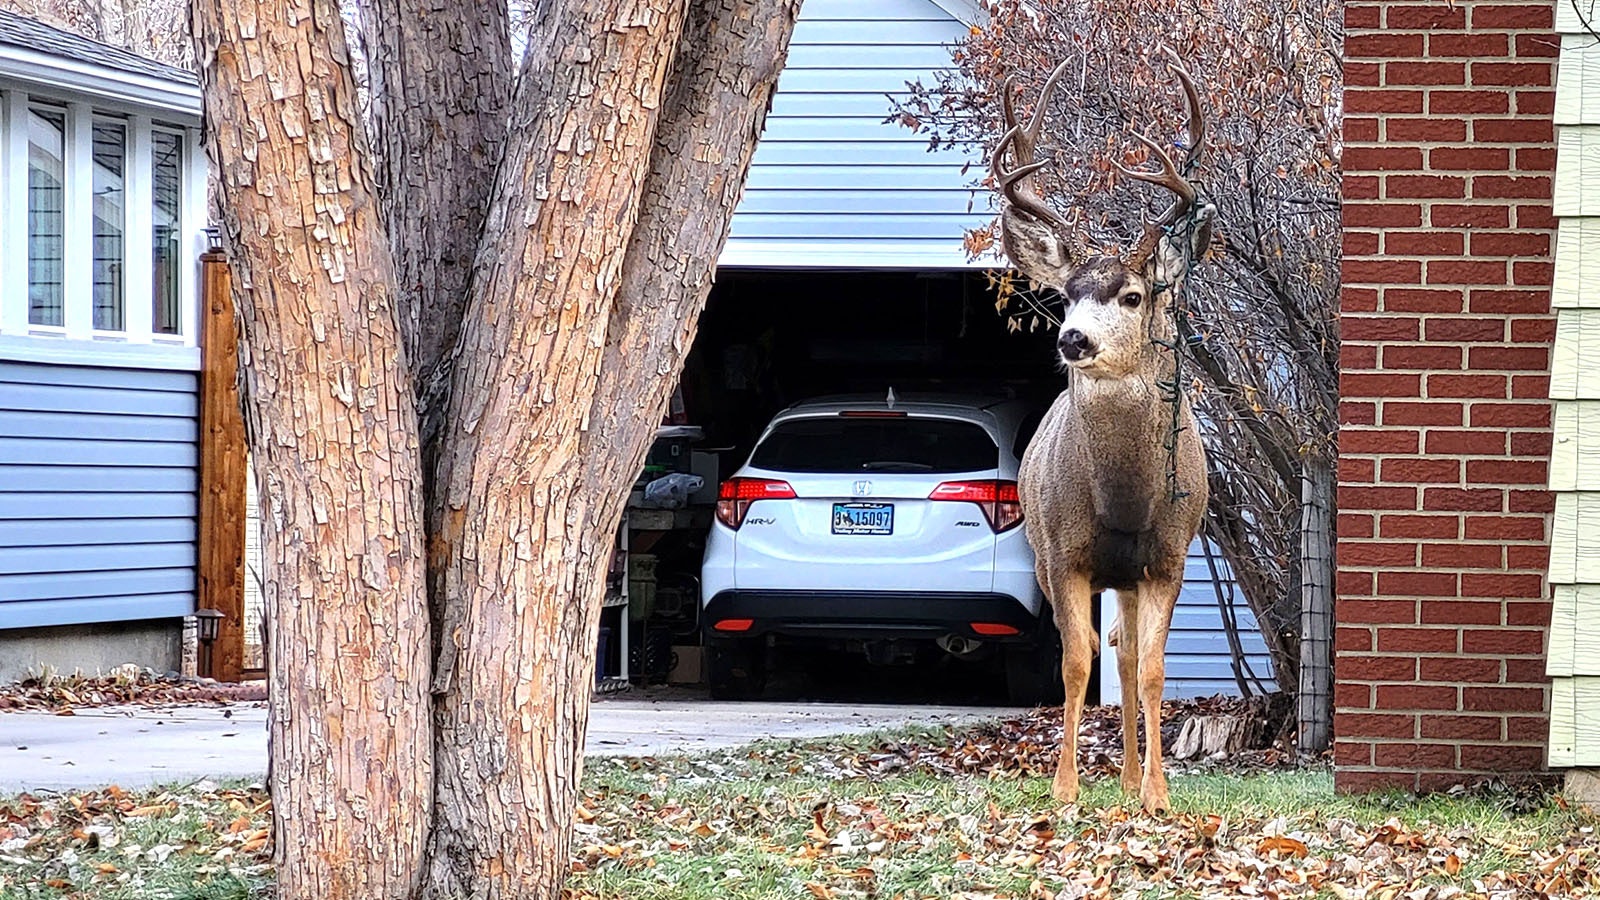 This big mule deer buck is one of three in Sheridan that got into the holiday spirit, so to speak, by snagging Christmas lights on its antlers.